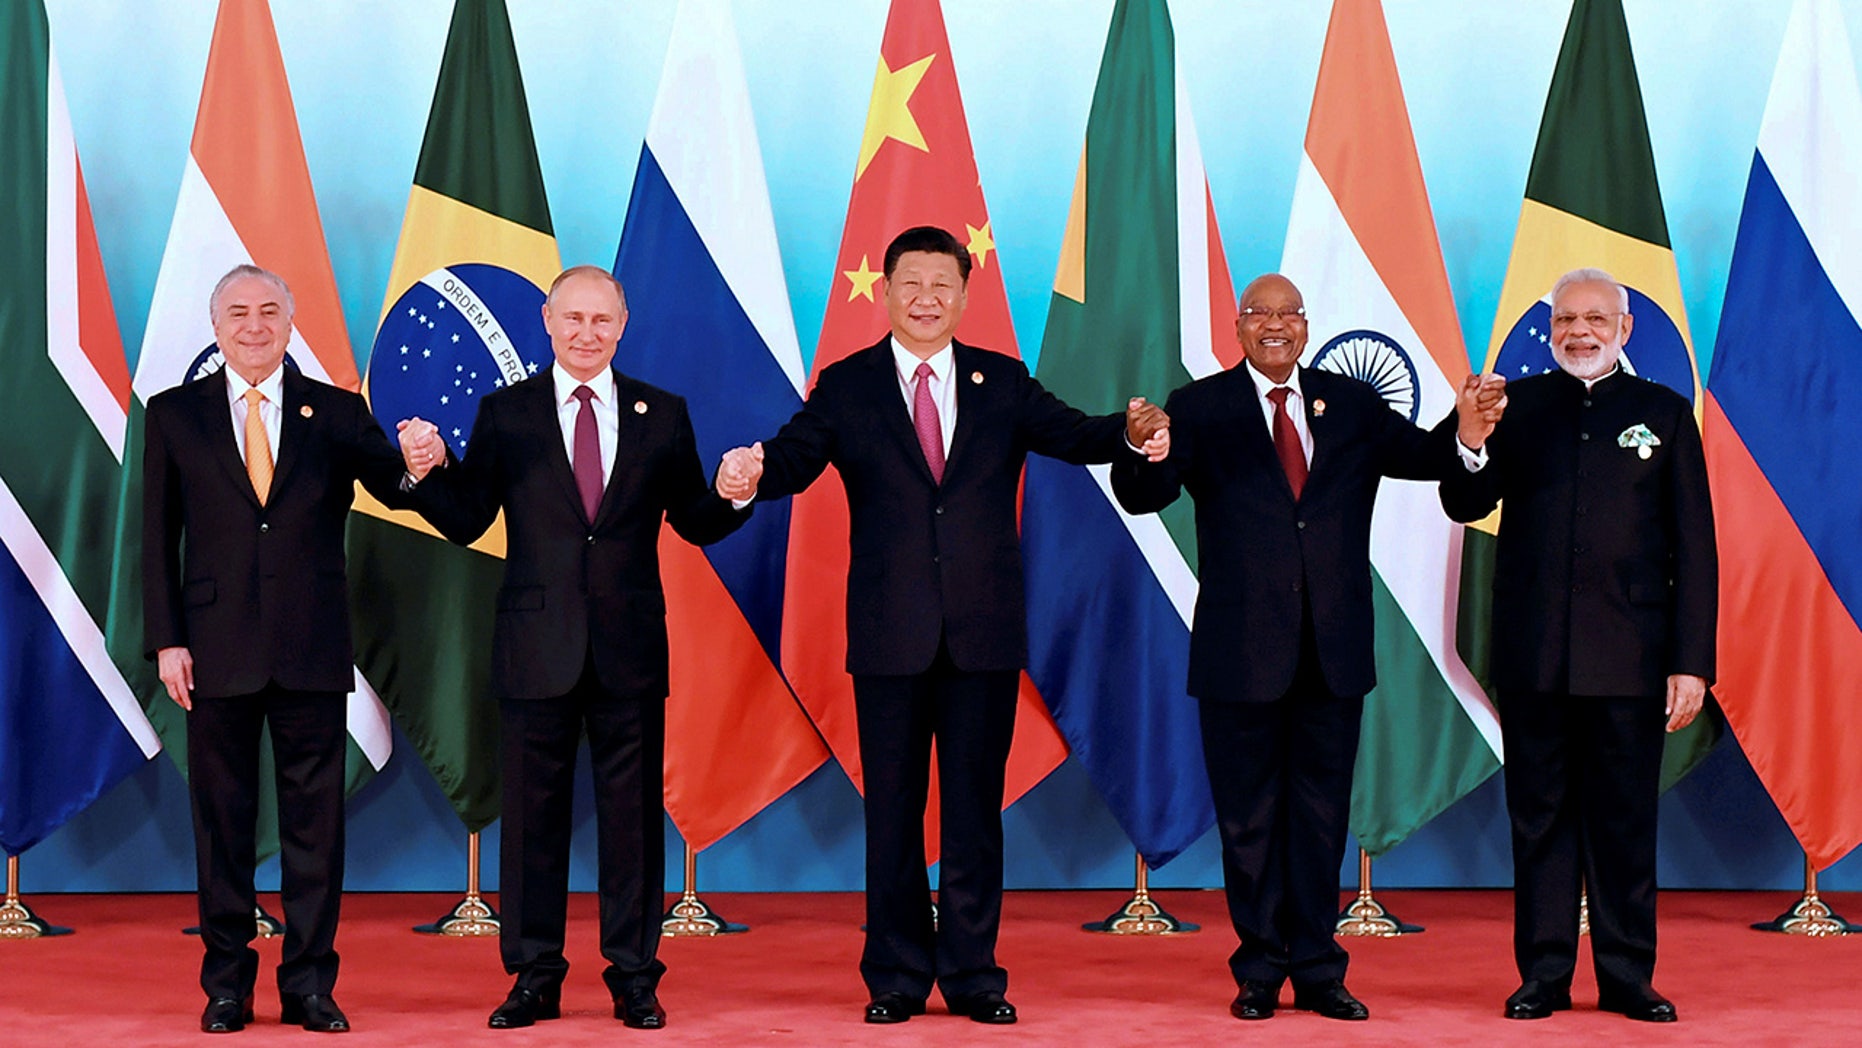 BRICS pushes for United Nations reform, cooperation to defeat terrorism Fox News